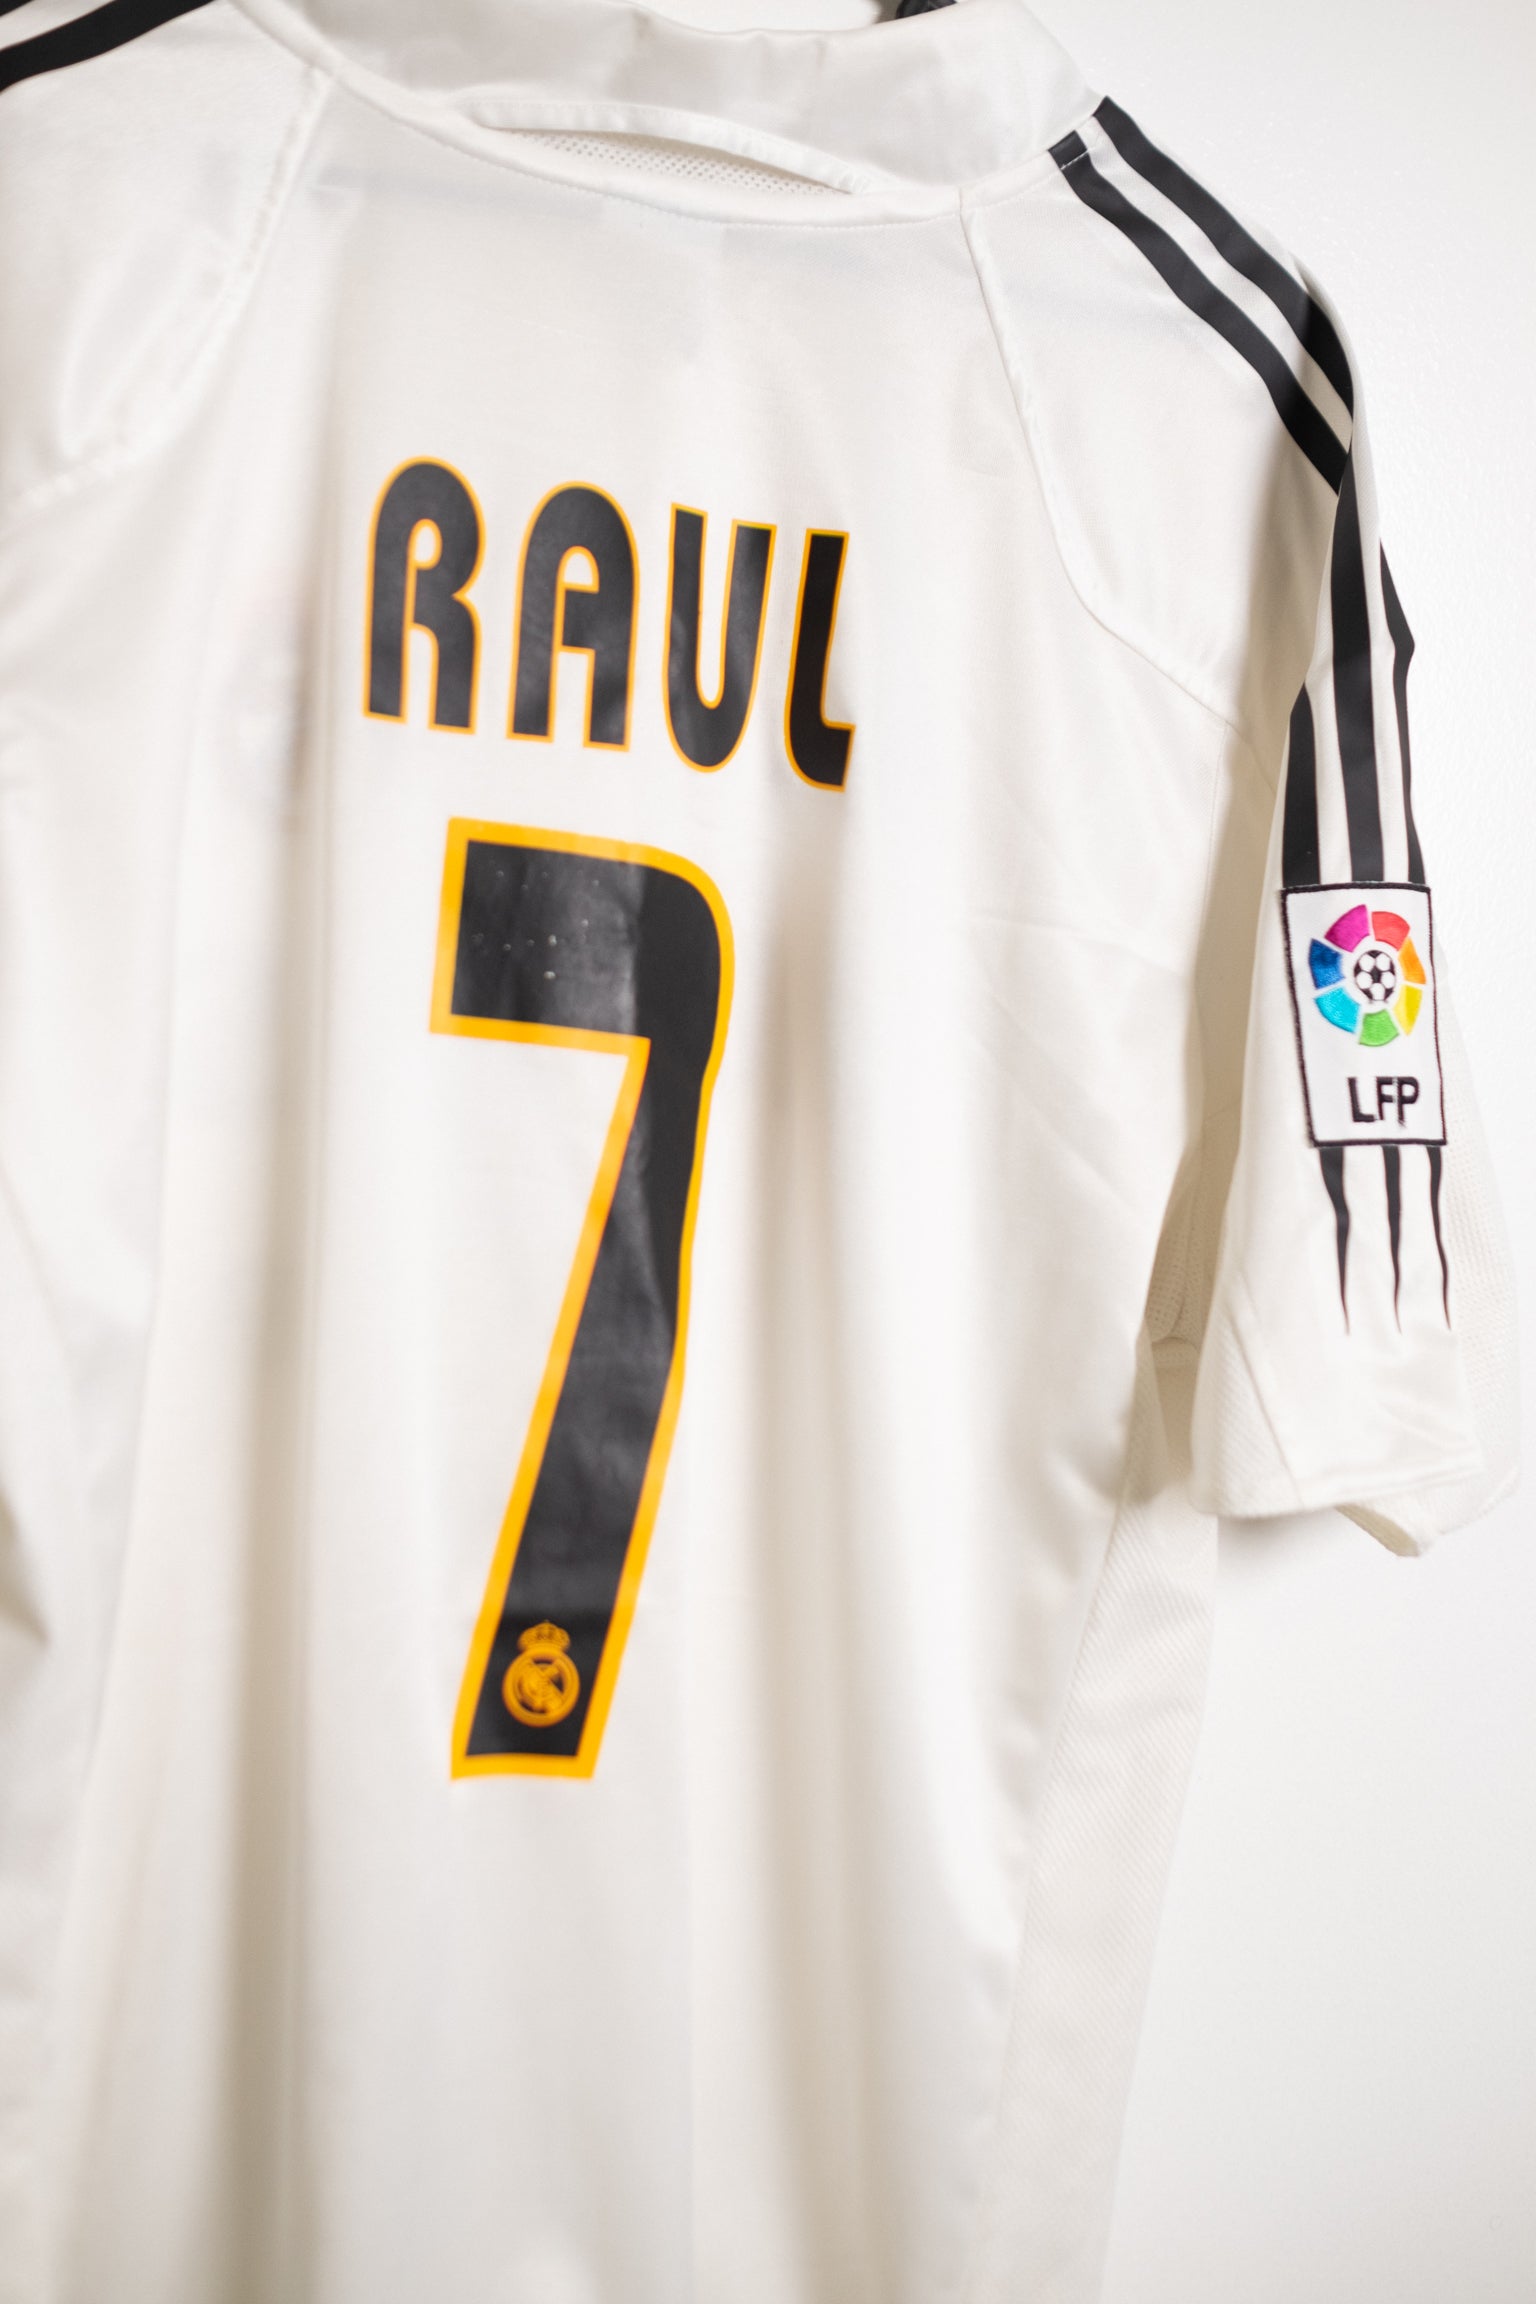 raul 7 real madrid jersey